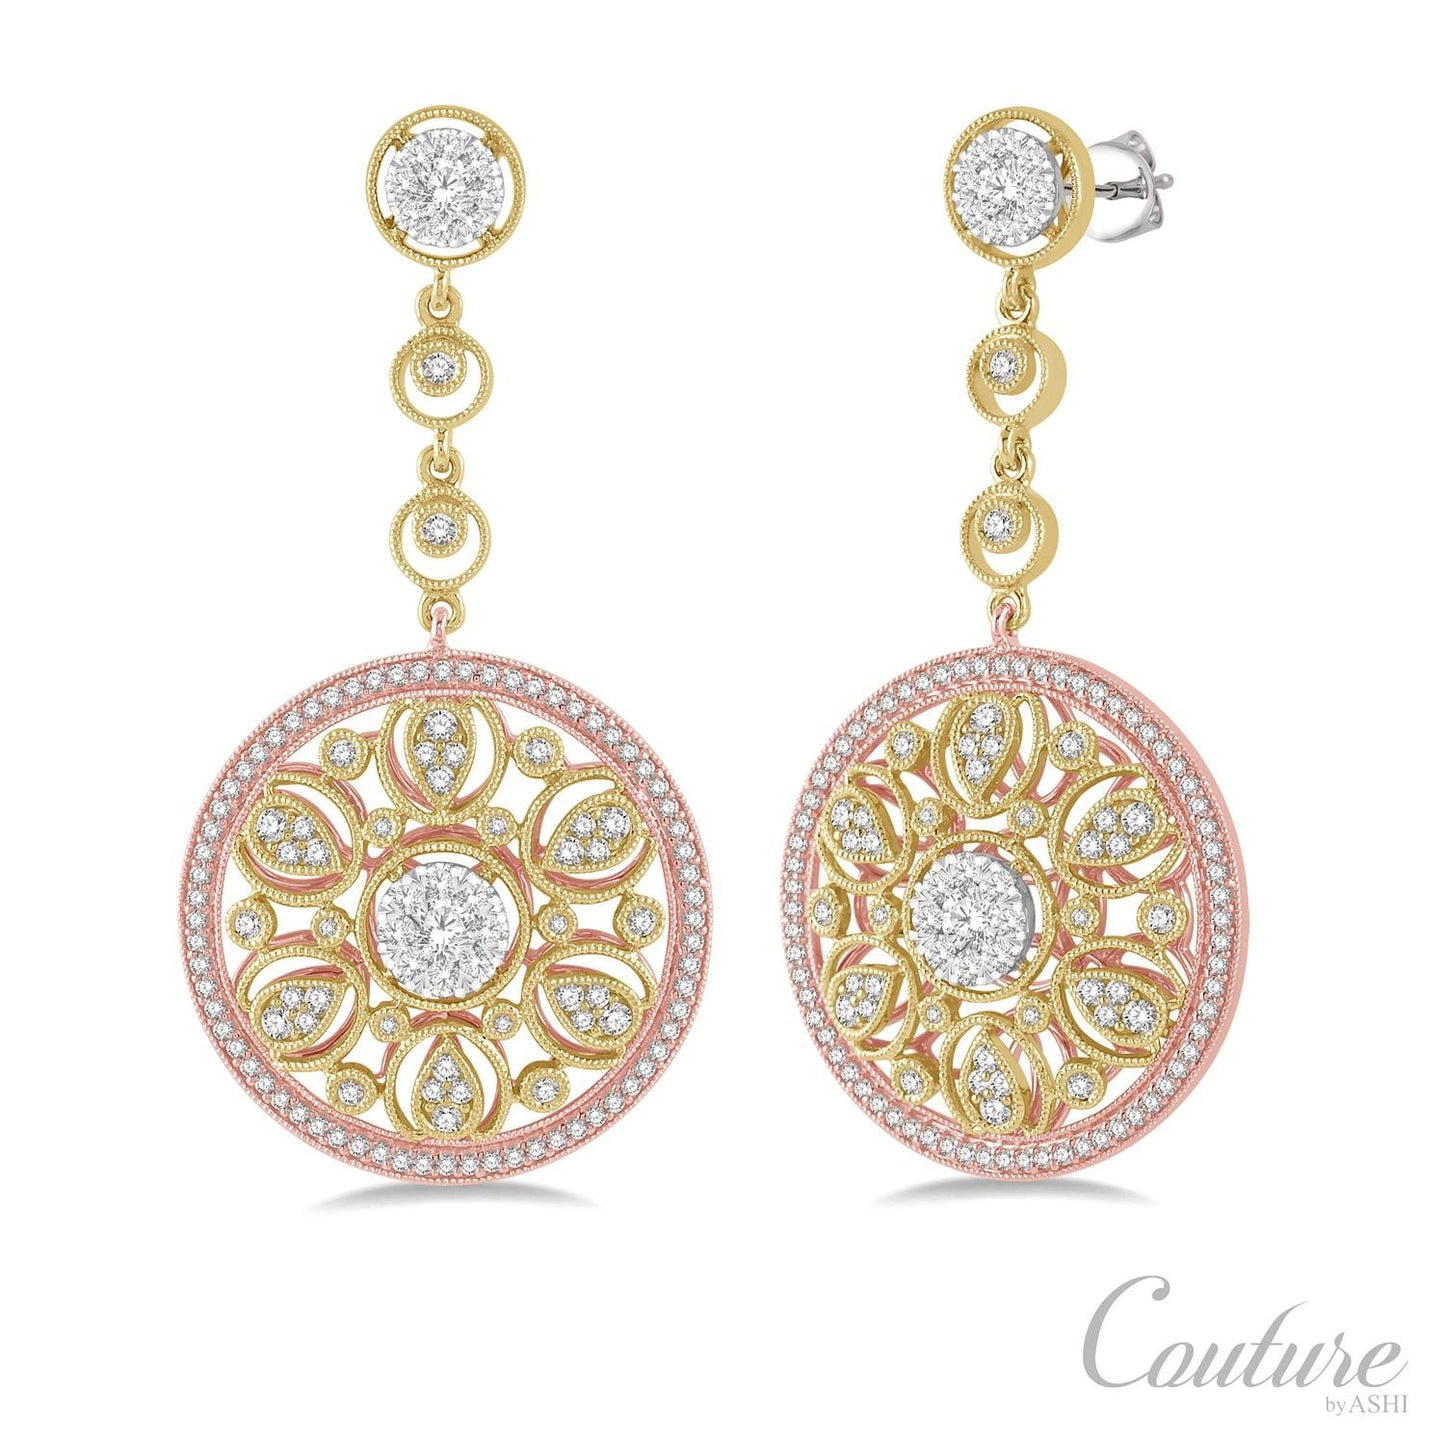 18k Couture 2 Carats Round Tri-Color Earrings